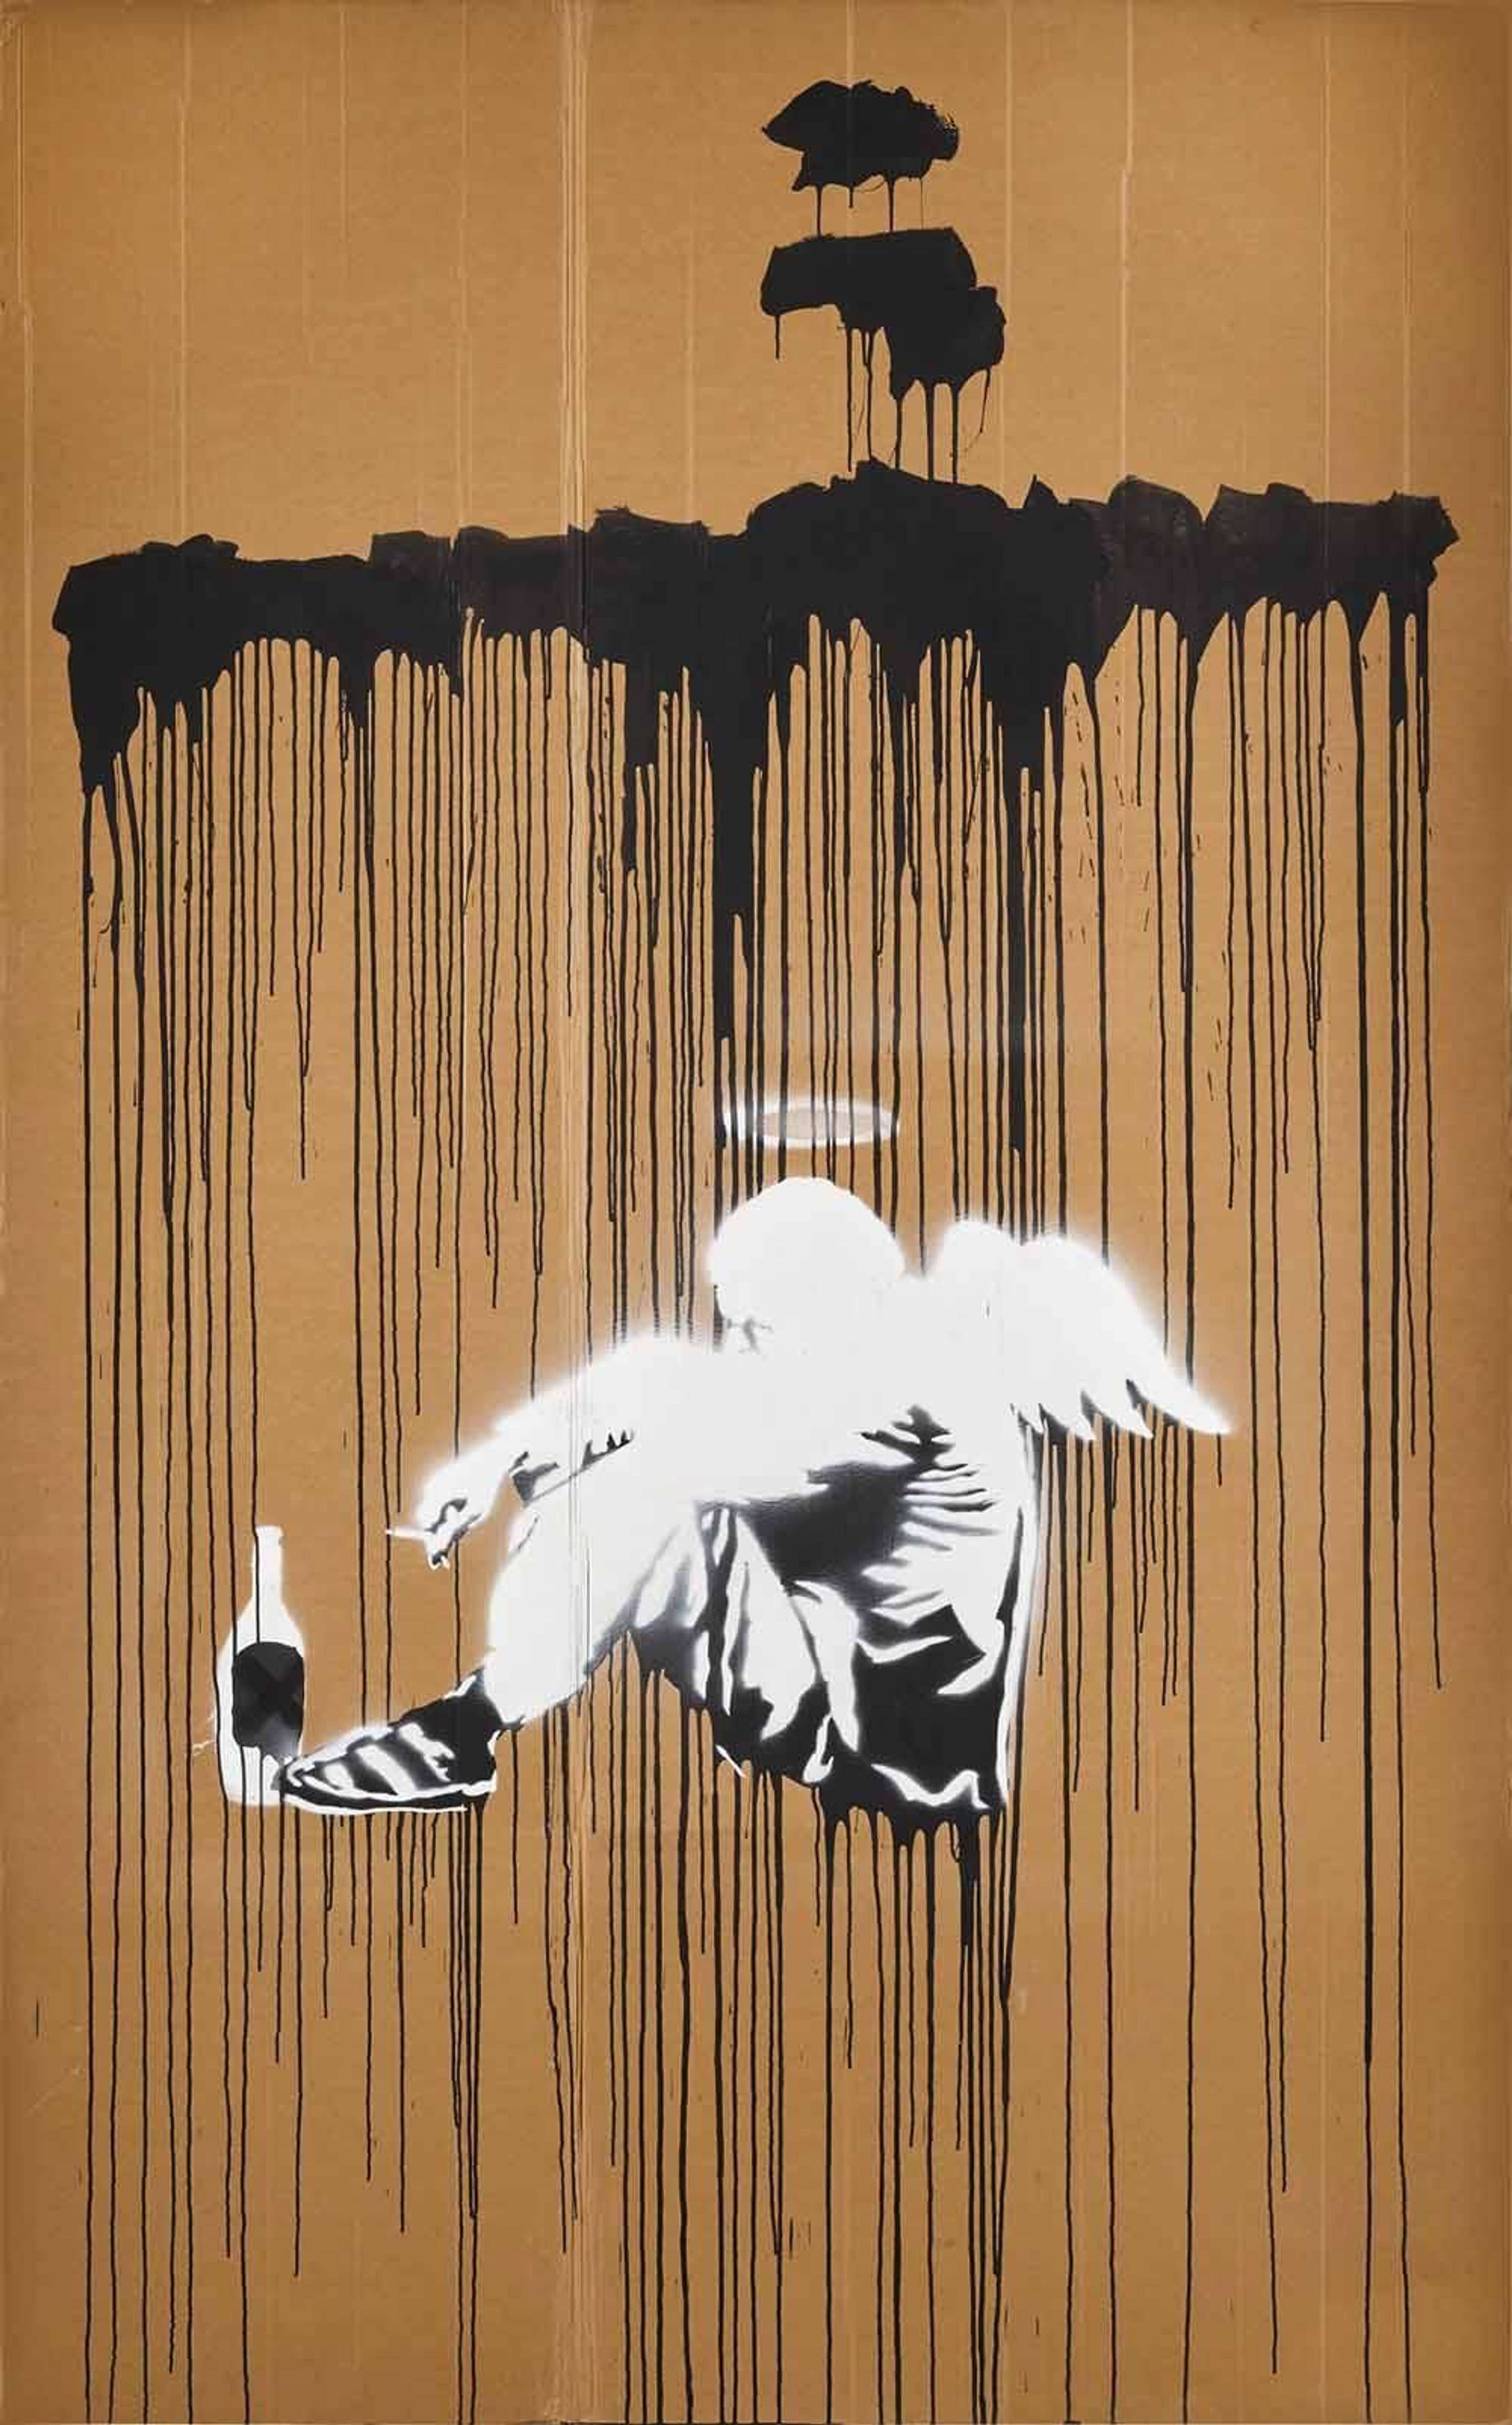 Banksy's Fallen Angel. A spray paint work on cardboard of a man, dressed in white with a halo and angel wings.